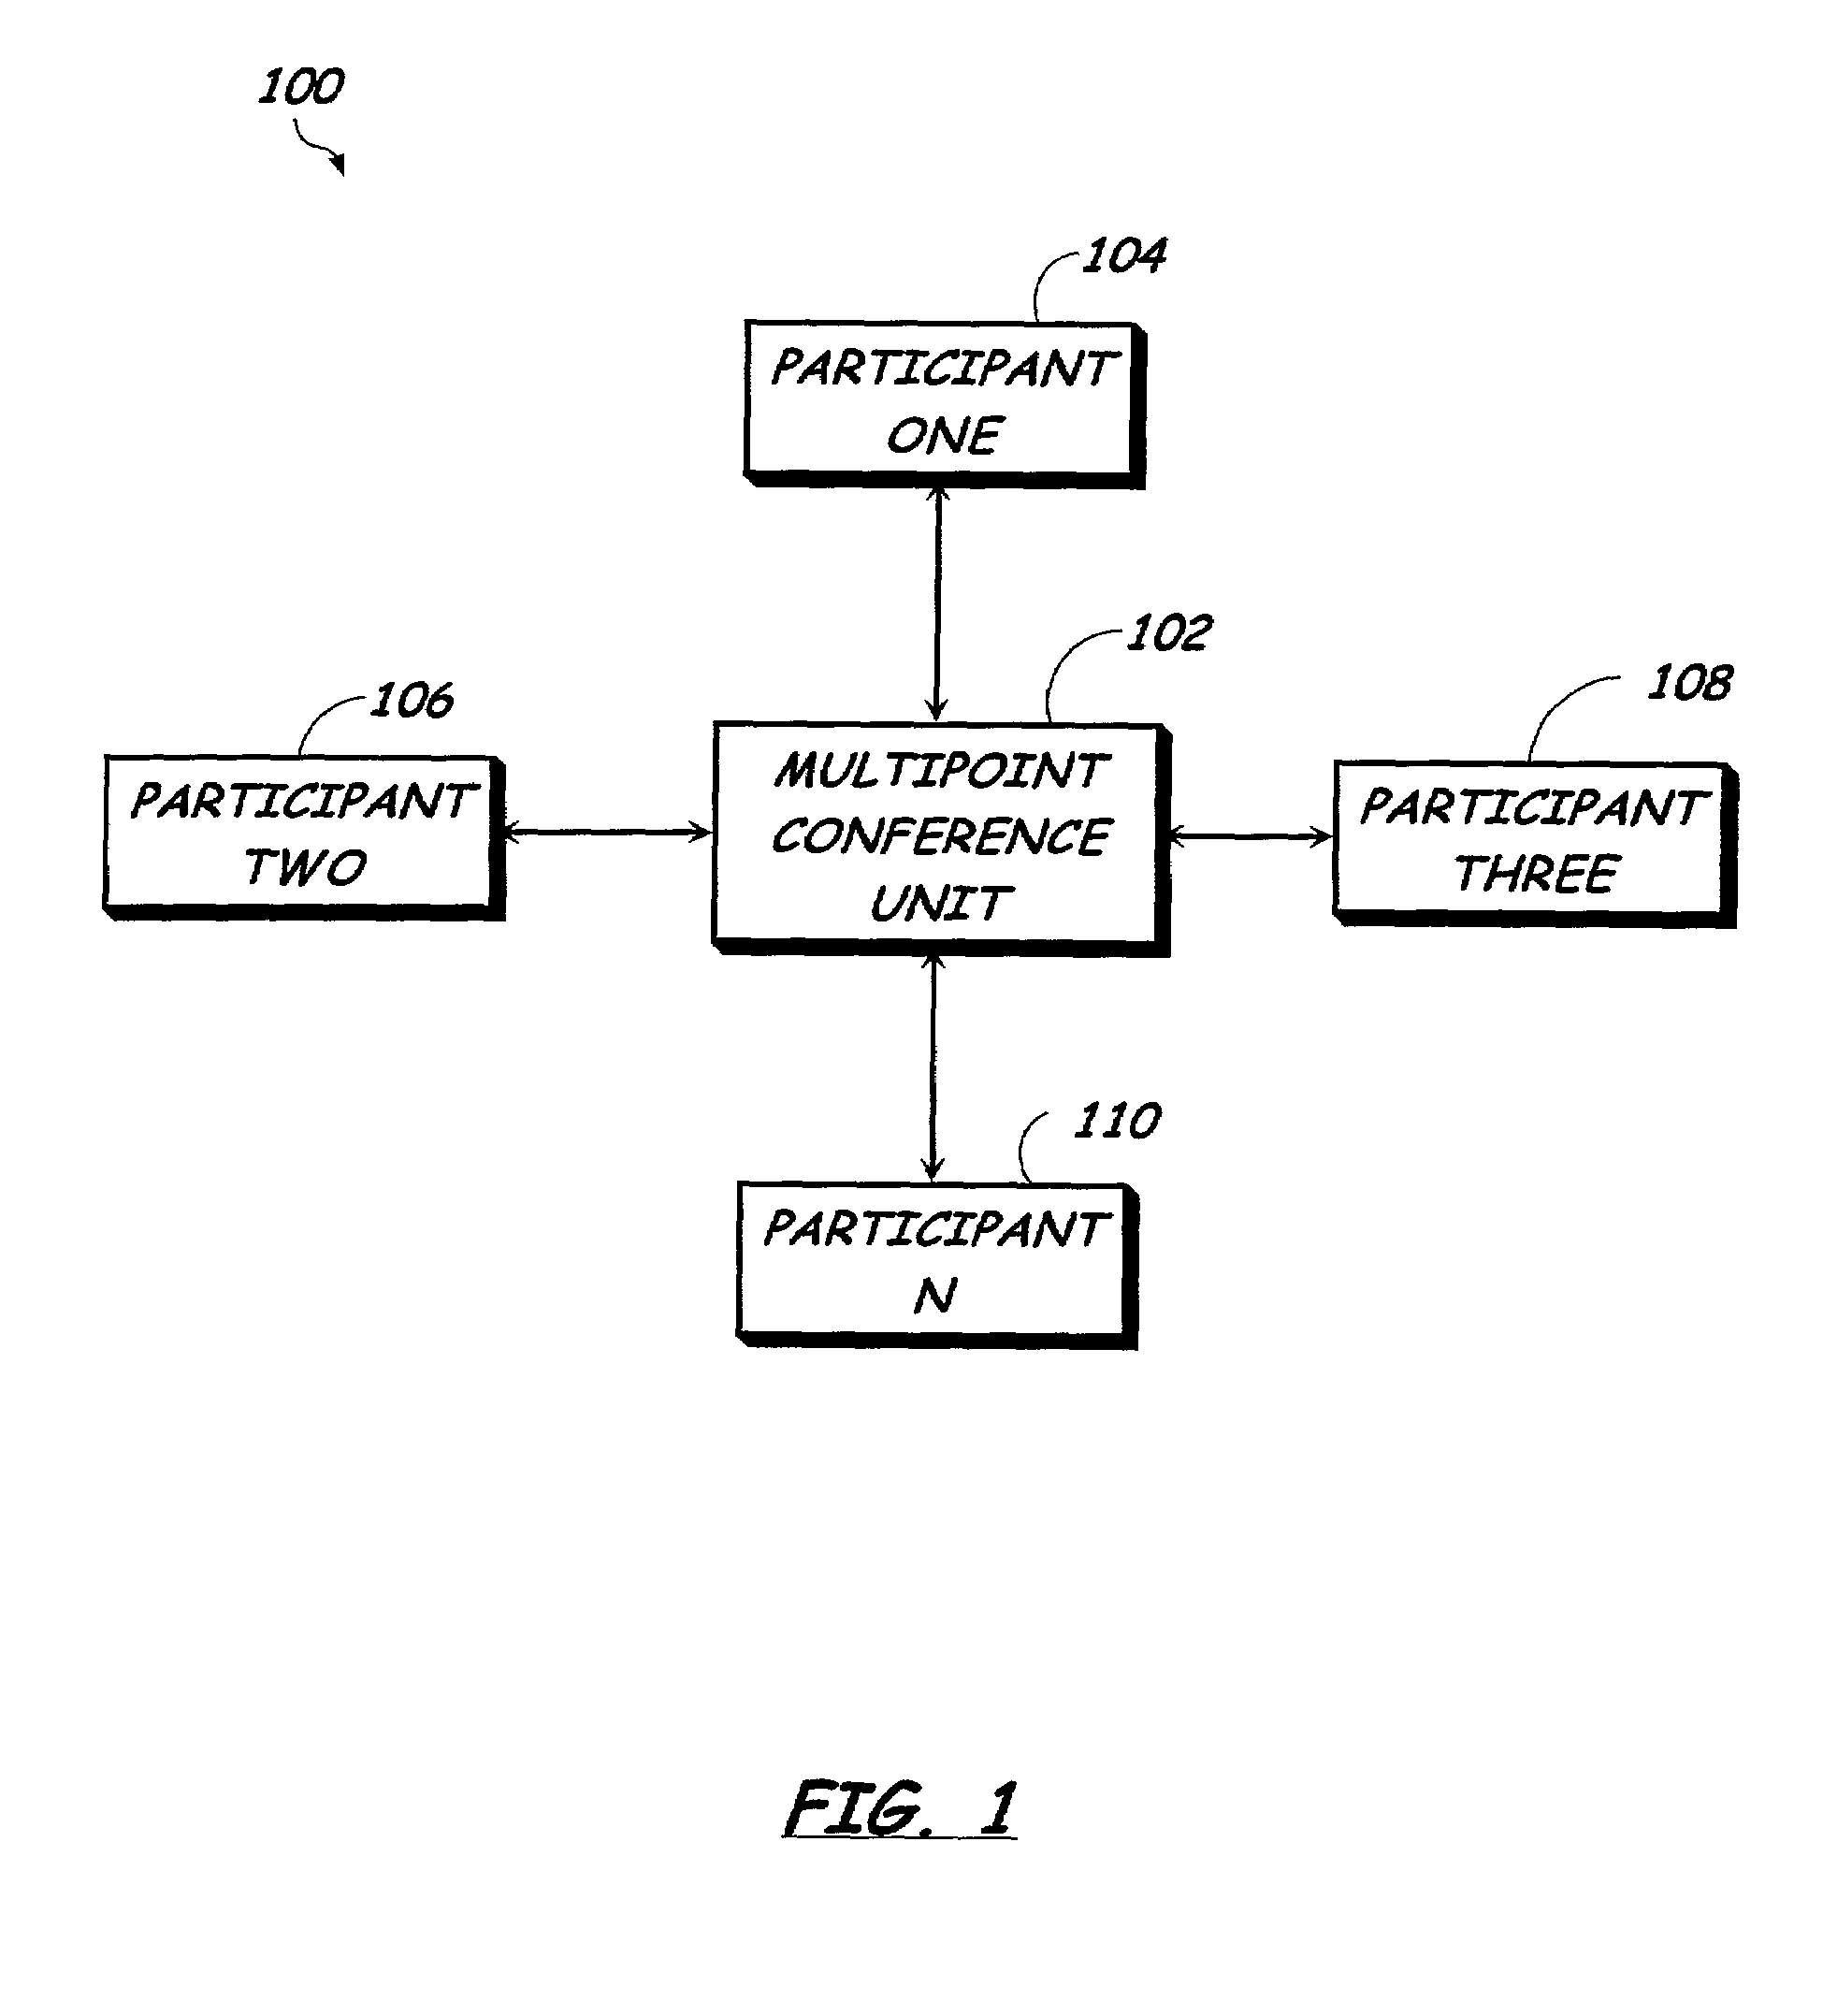 Method for background noise reduction and performance improvement in voice conferencing over packetized networks